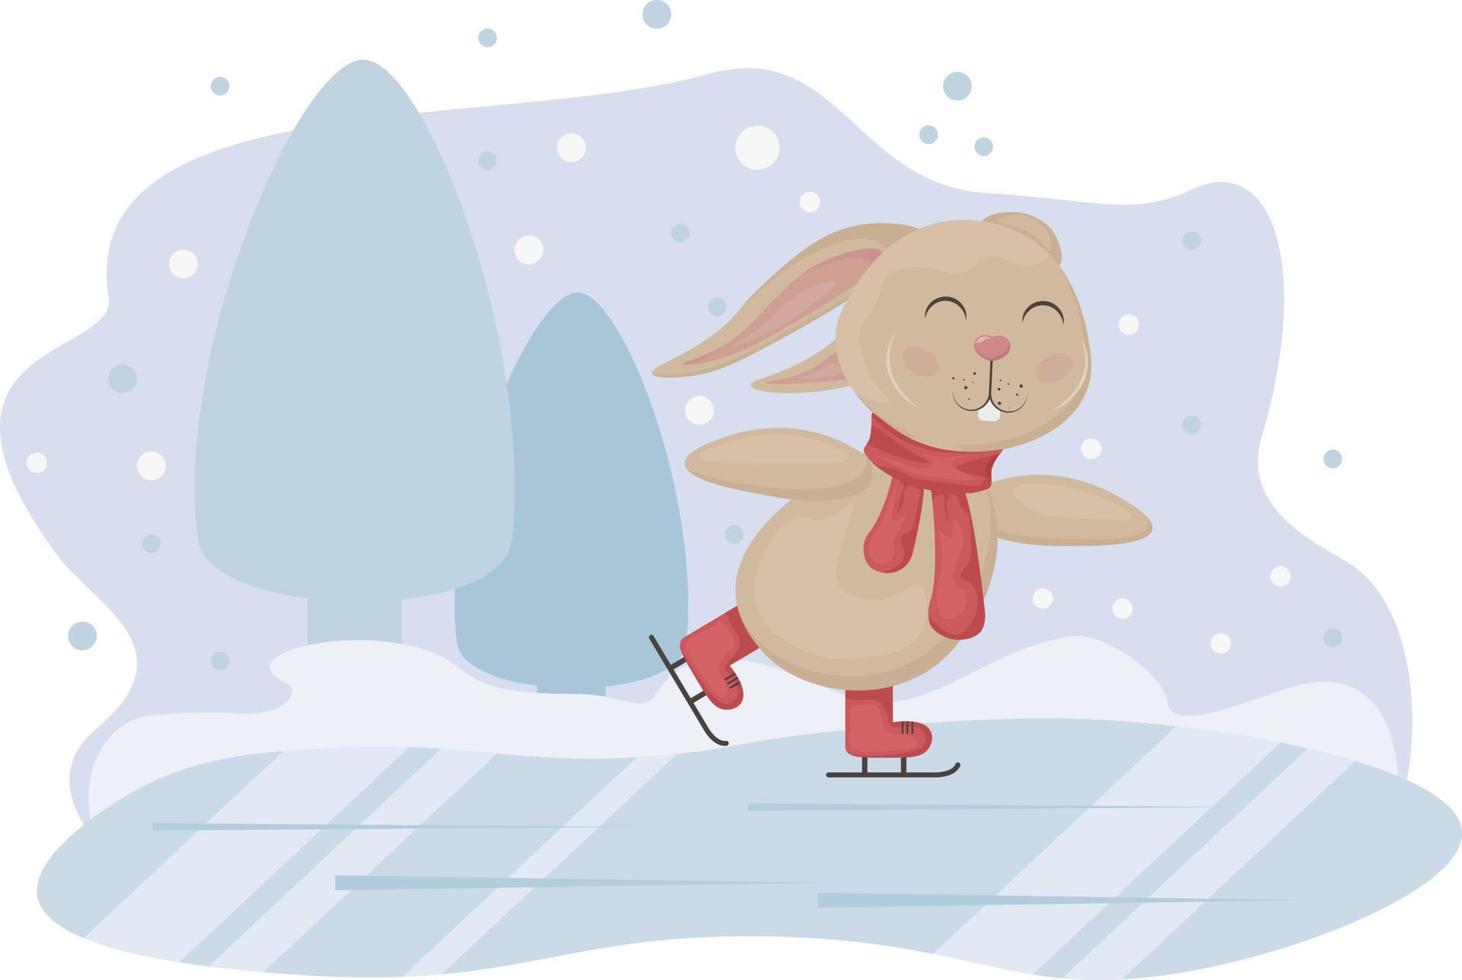 Rabbit. Winter illustration with the image of a cute rabbit skating. Rabbit on ice. Children s Christmas illustration. Vector